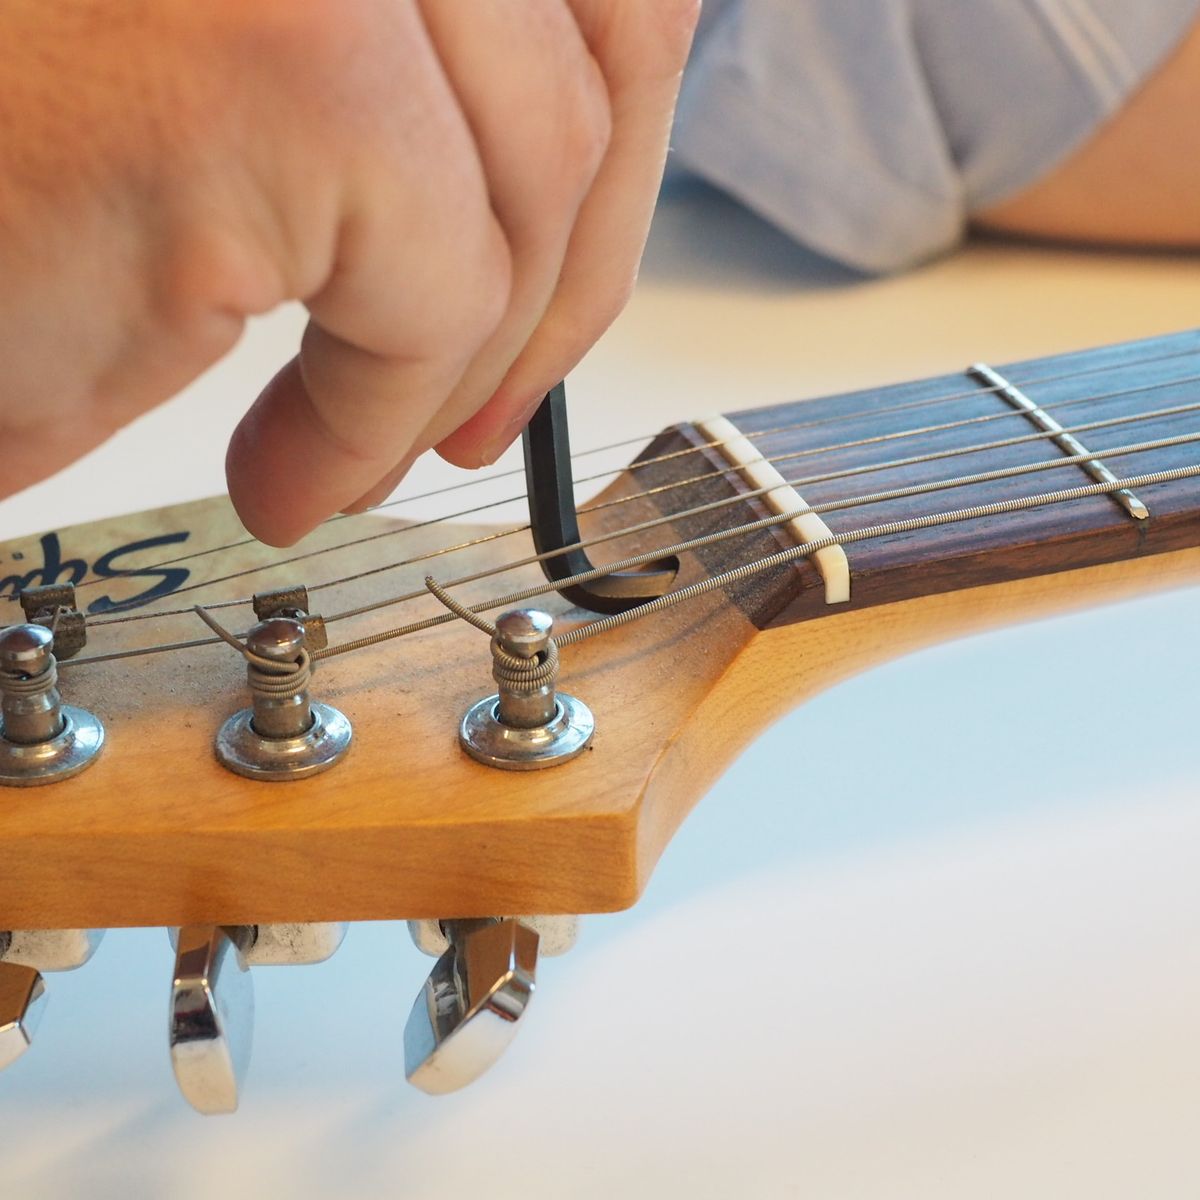 maintenance - How can I stop my electric guitar strings from